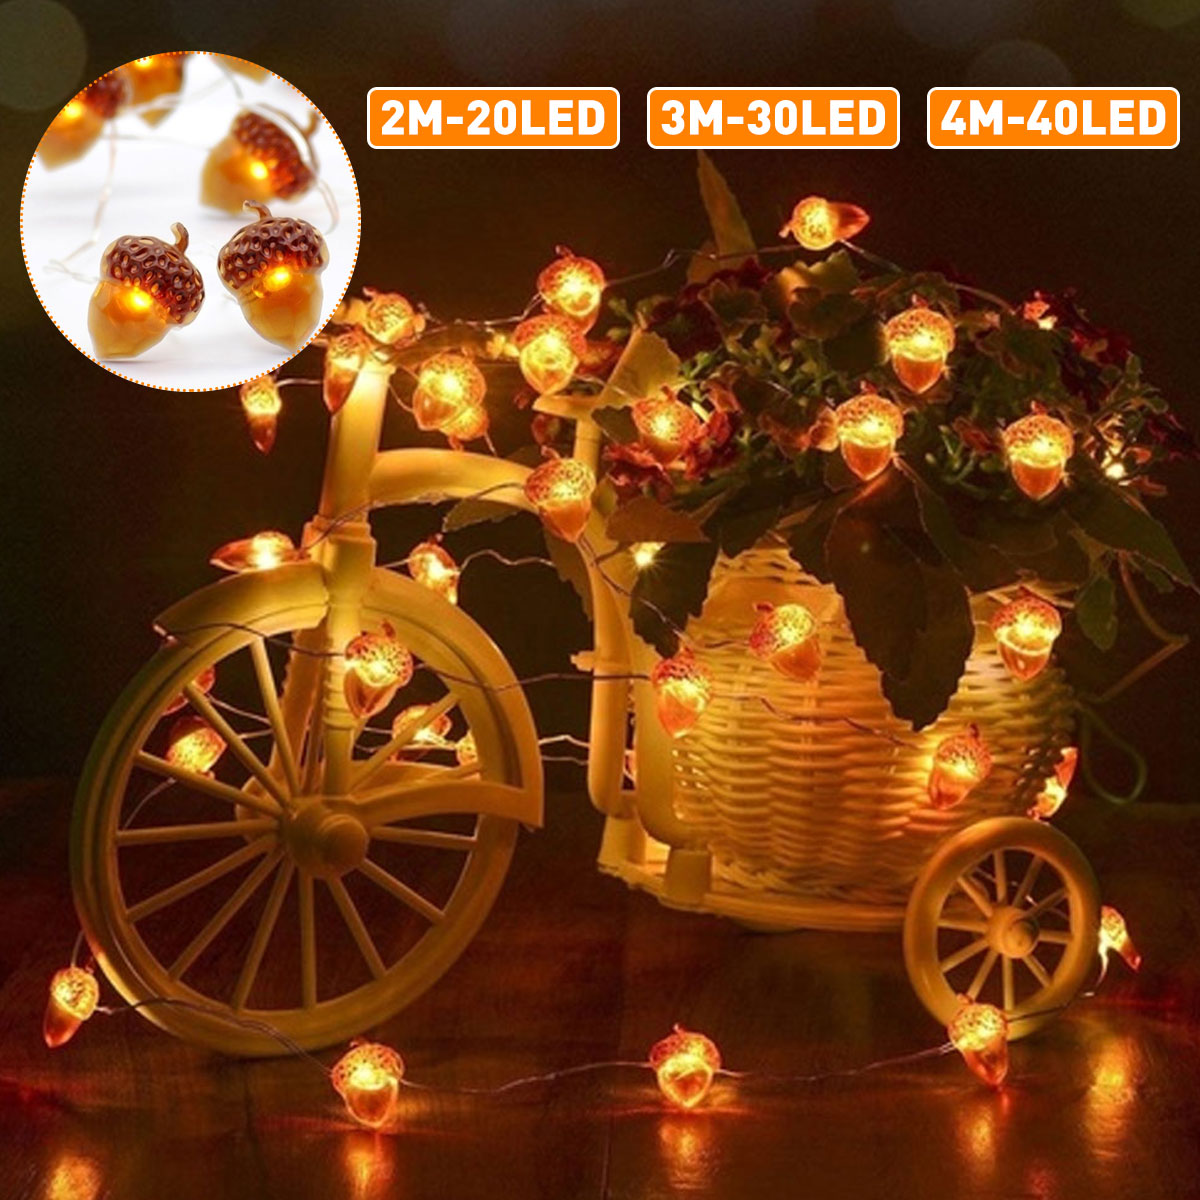 2M3M4M-LED-Acorn-String-Light-8-Modes-Waterproof-Christmas-Party-Decorative-Lamp-with-Remote-Control-1736088-1